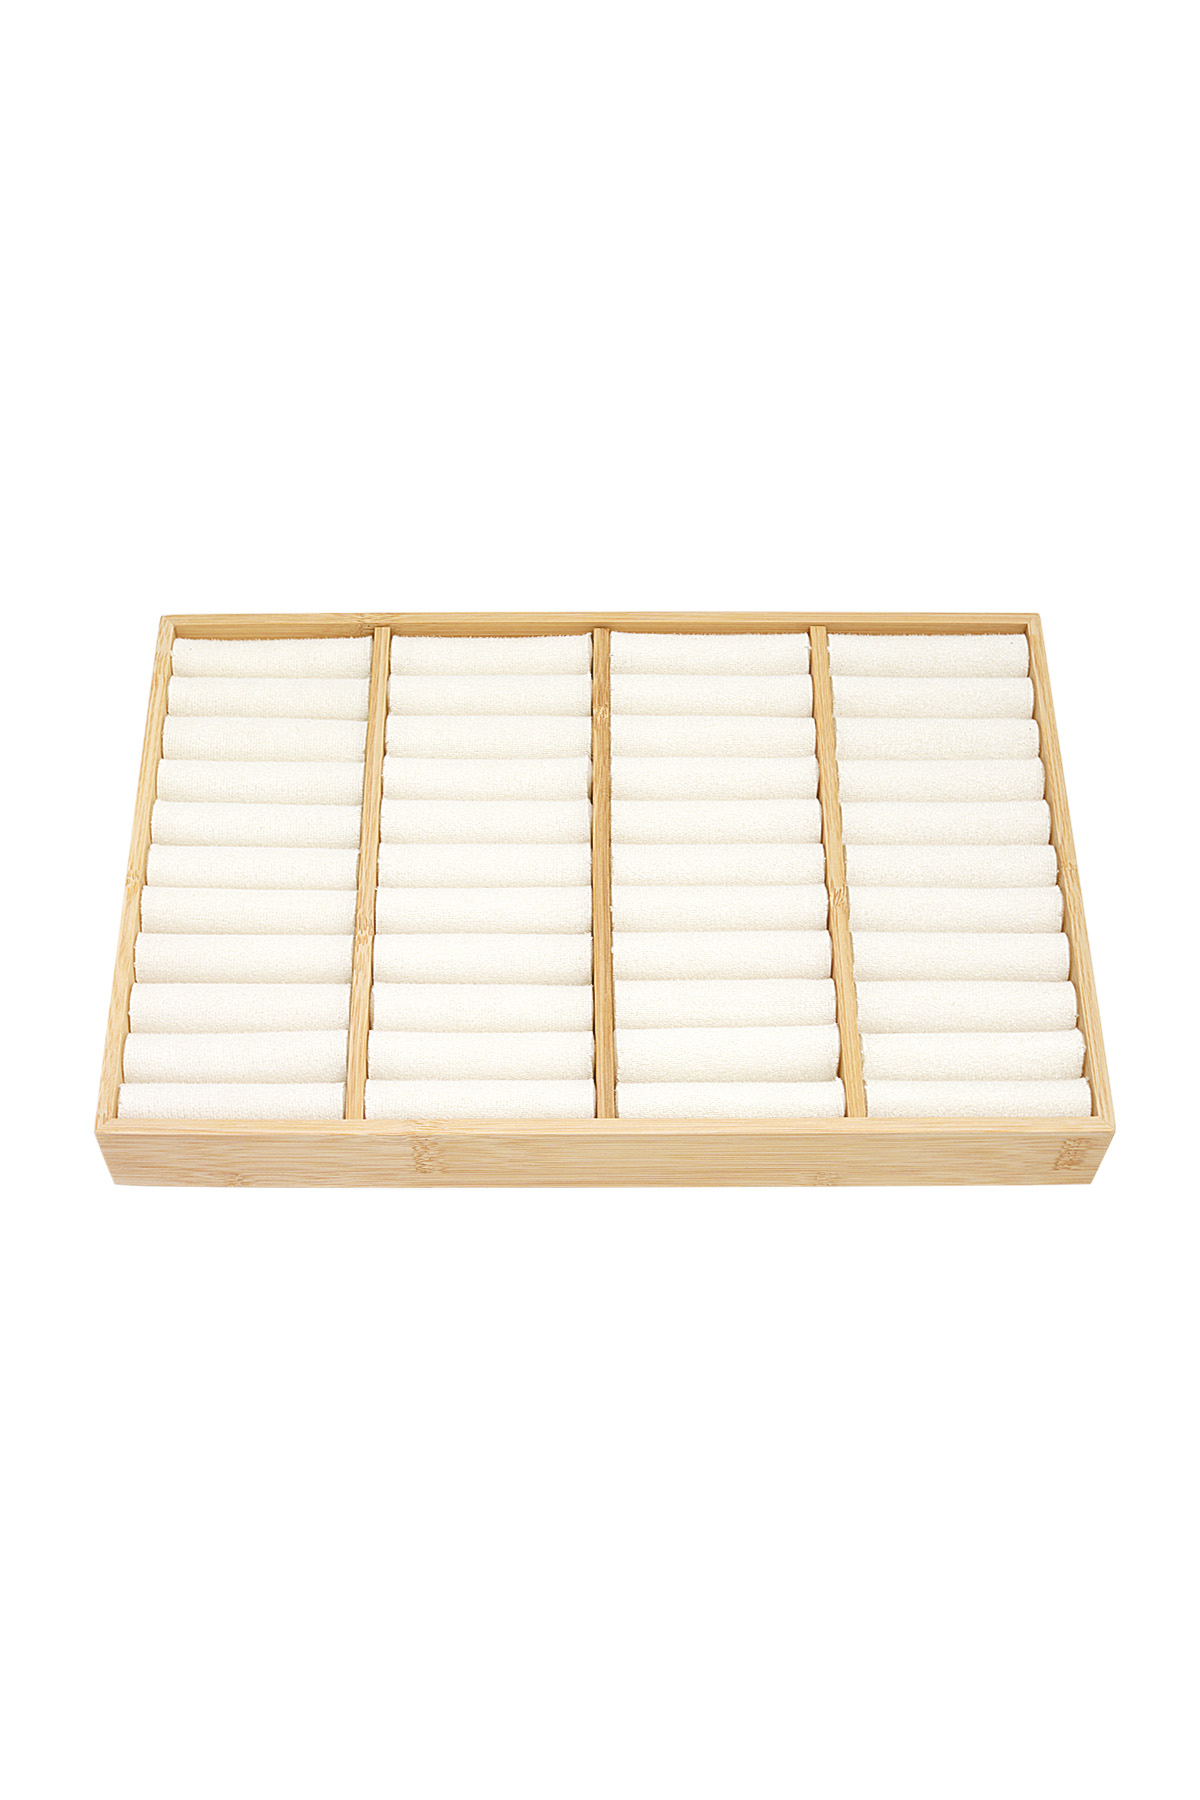 Ring display 4 compartments - off-white